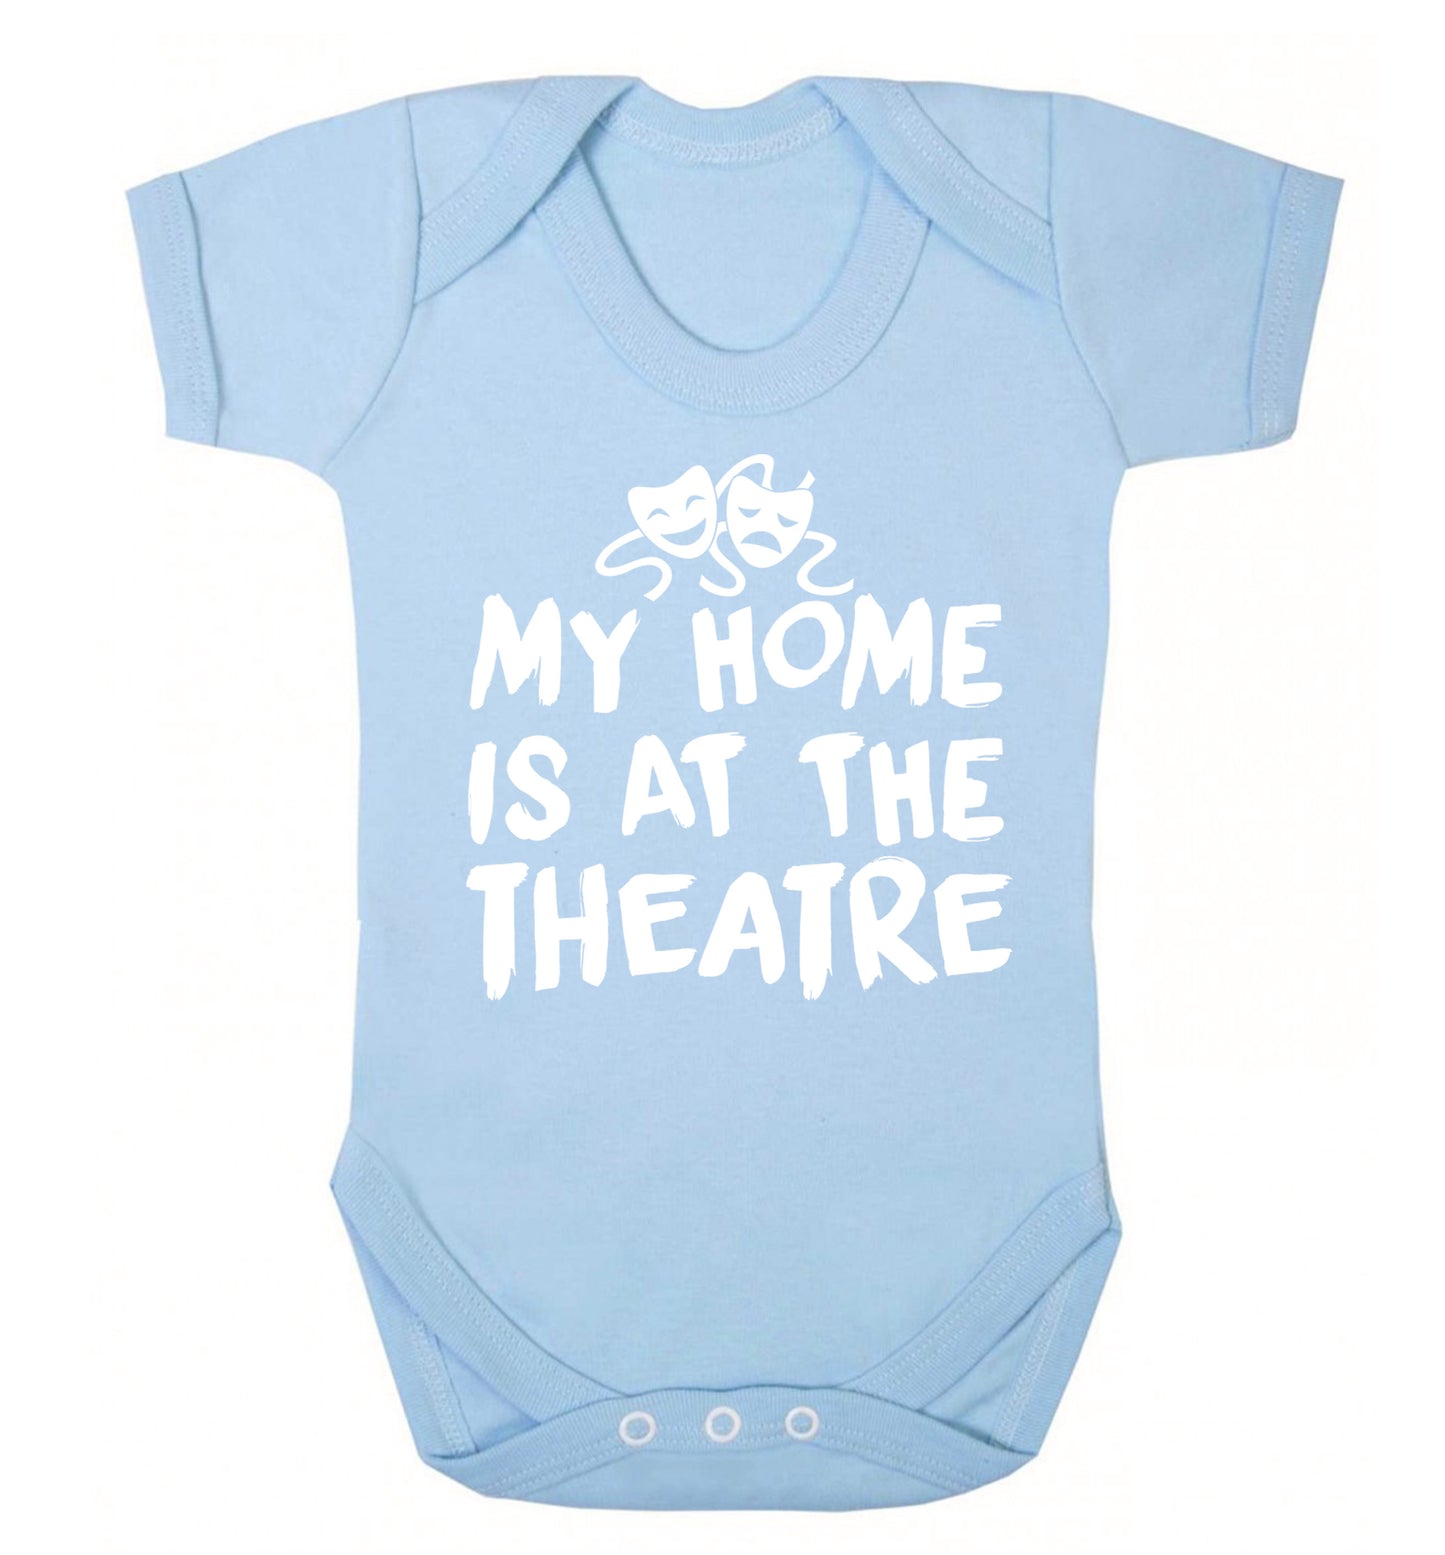 My home is at the theatre Baby Vest pale blue 18-24 months